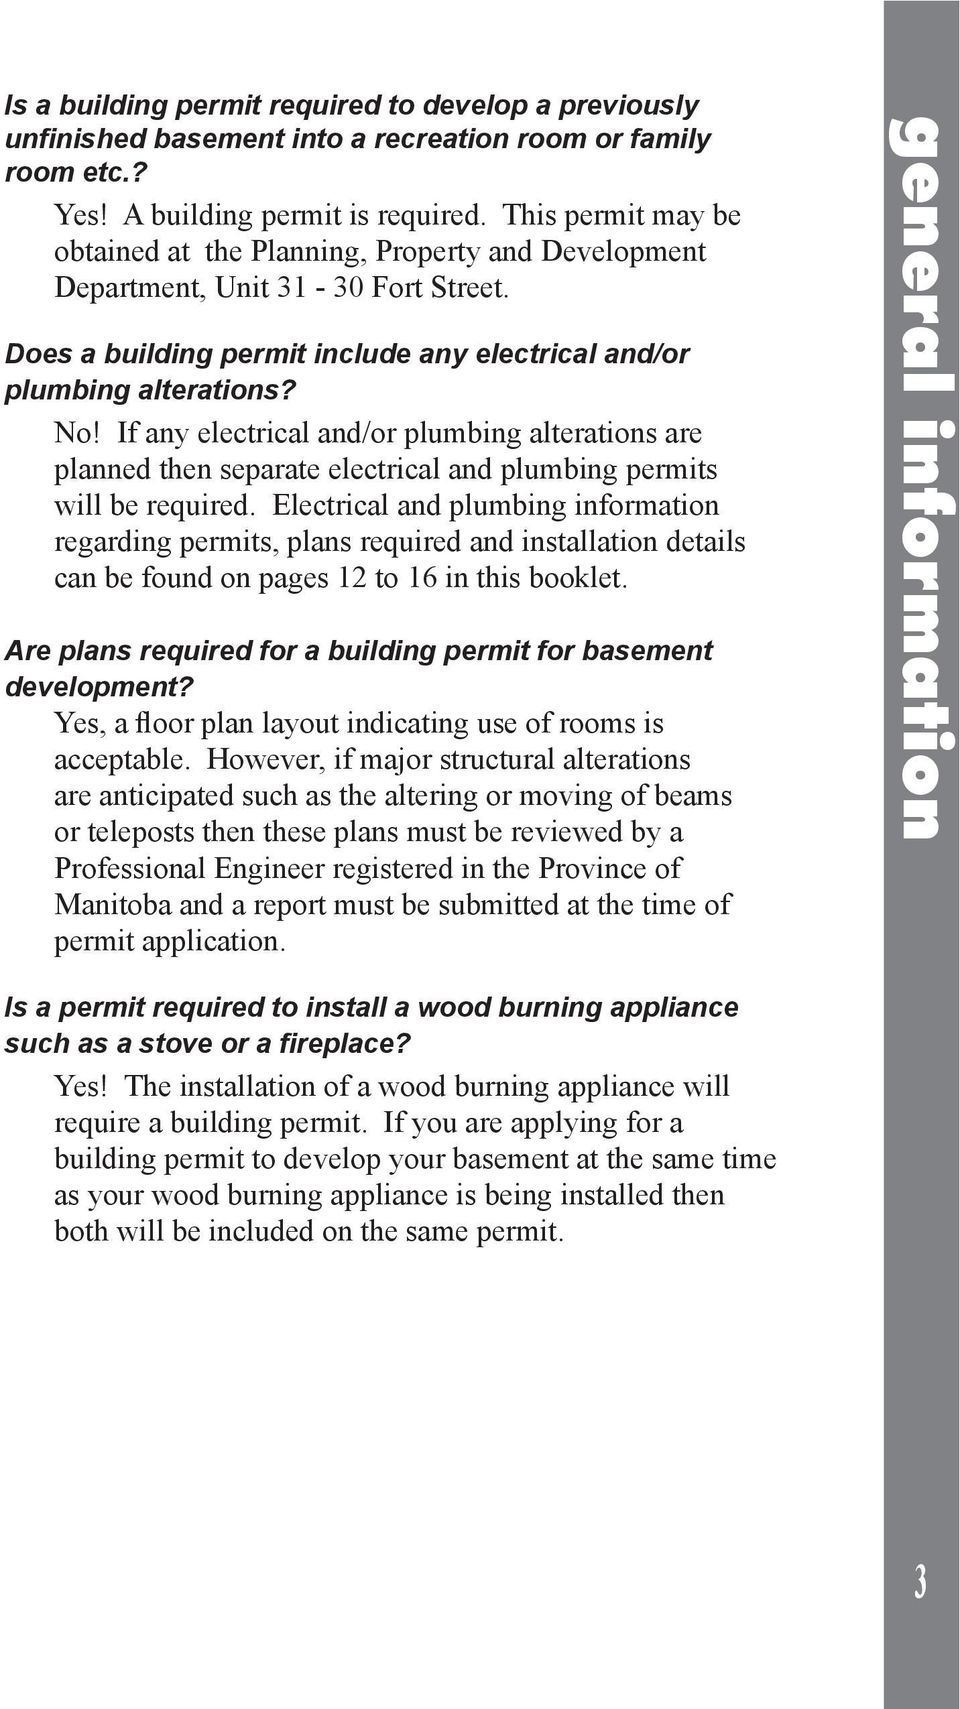 If any electrical and/or plumbing alterations are planned then separate electrical and plumbing permits will be required.